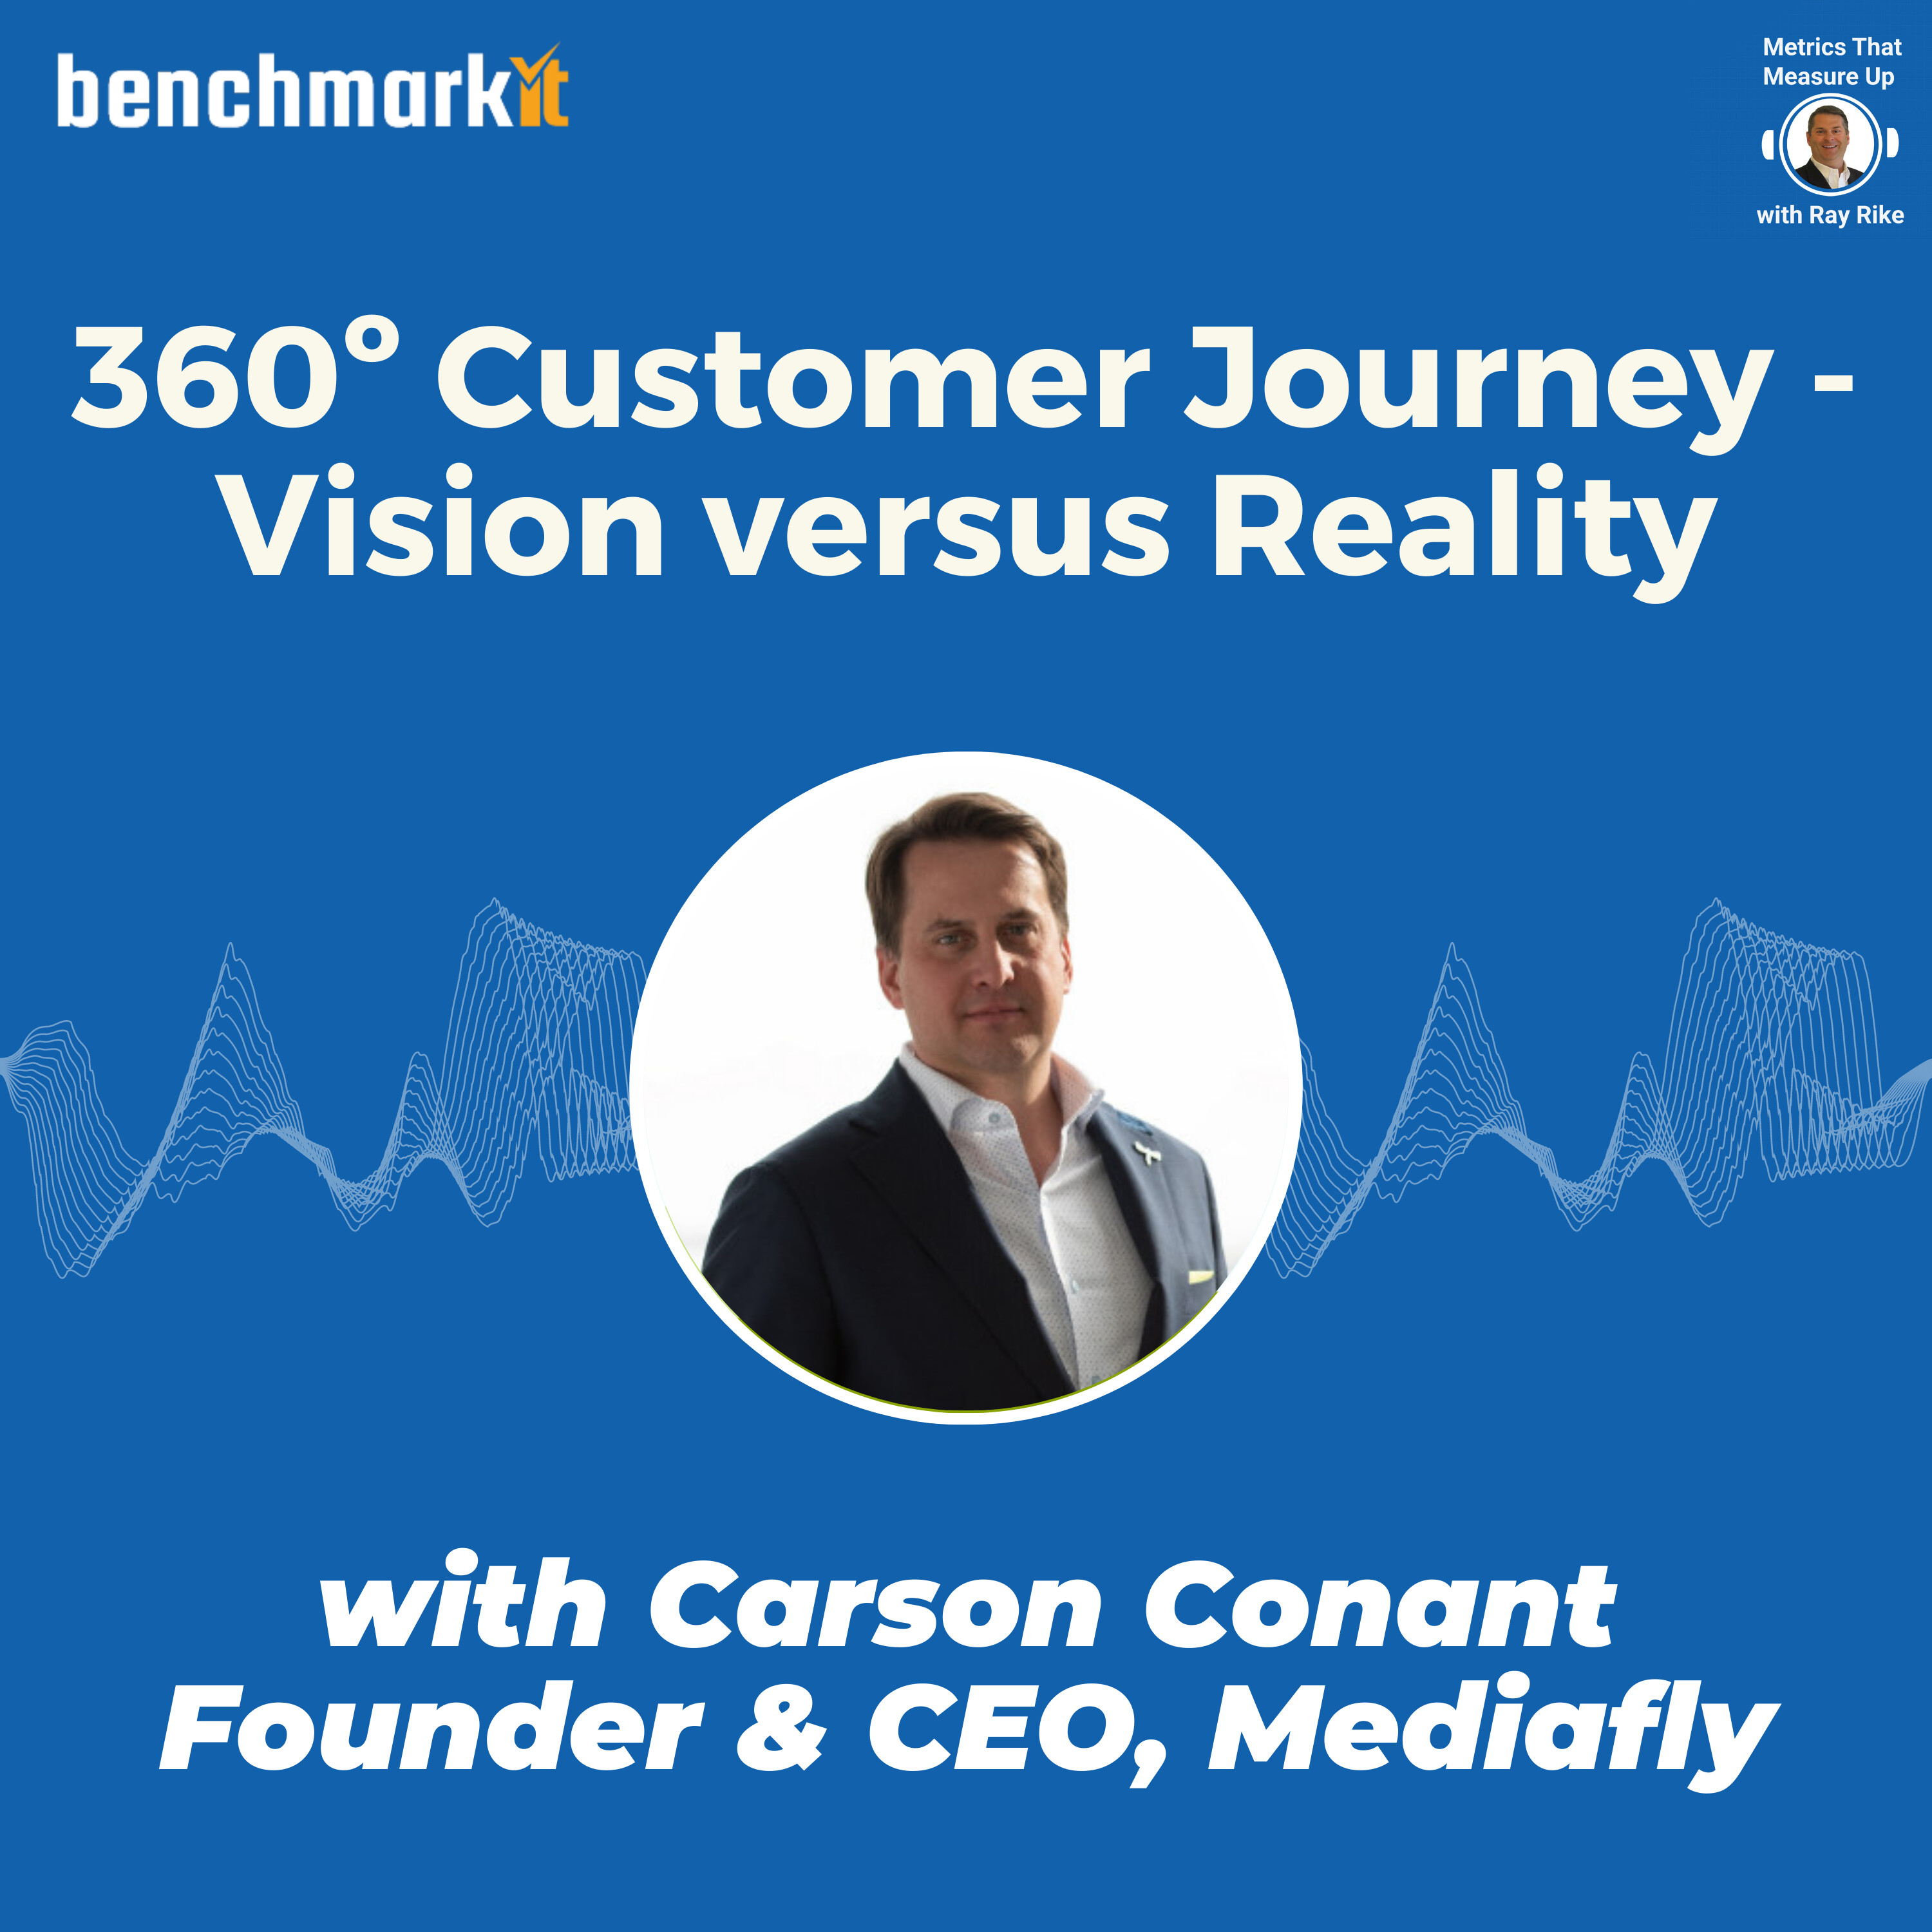 The 360° Customer Journey with Carson Conant, Founder and CEO Mediafly